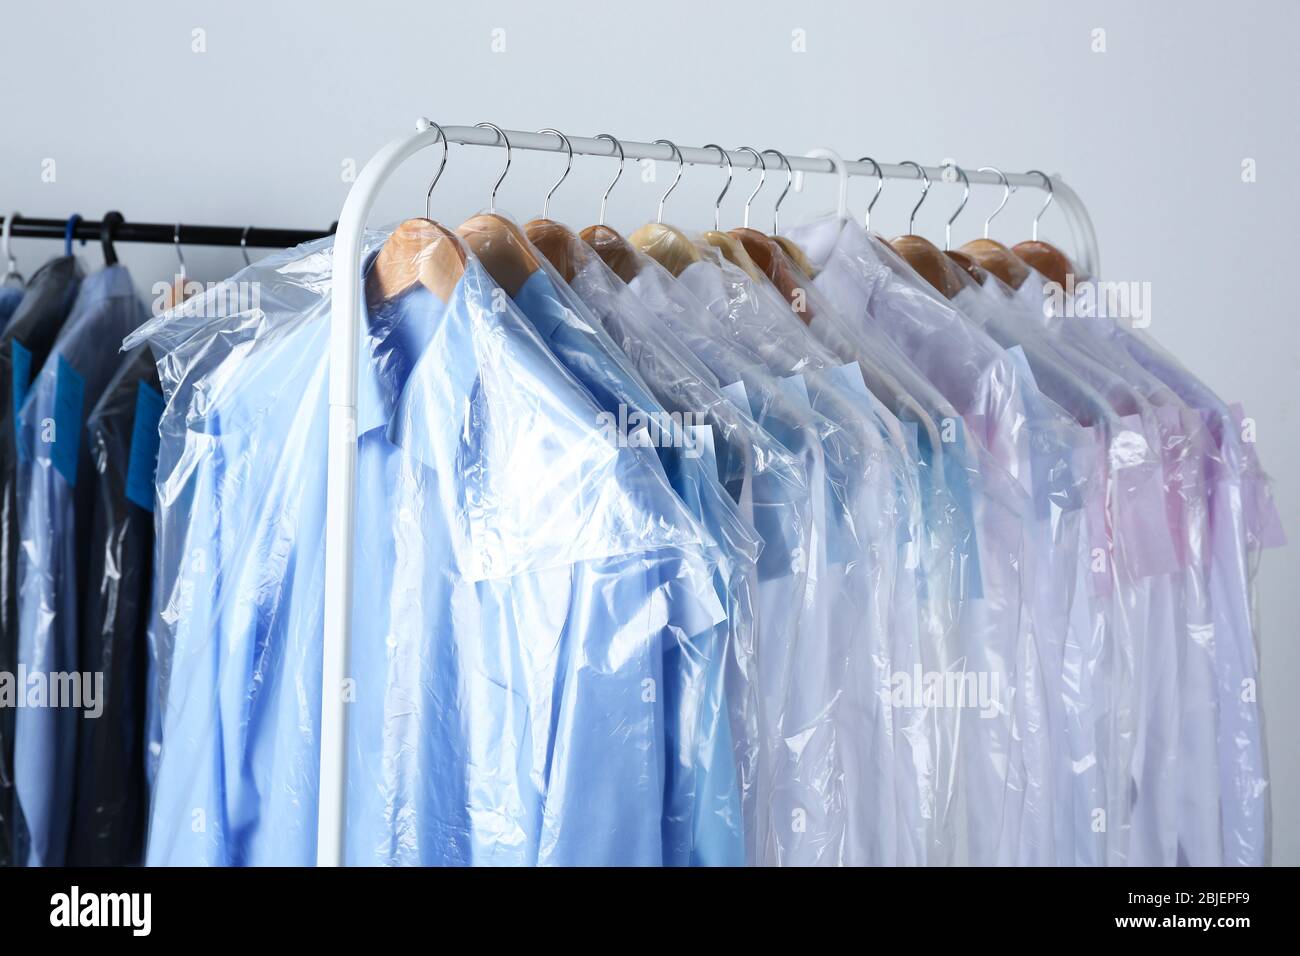 https://c8.alamy.com/comp/2BJEPF9/rack-of-clean-clothes-hanging-on-hangers-at-dry-cleaning-2BJEPF9.jpg